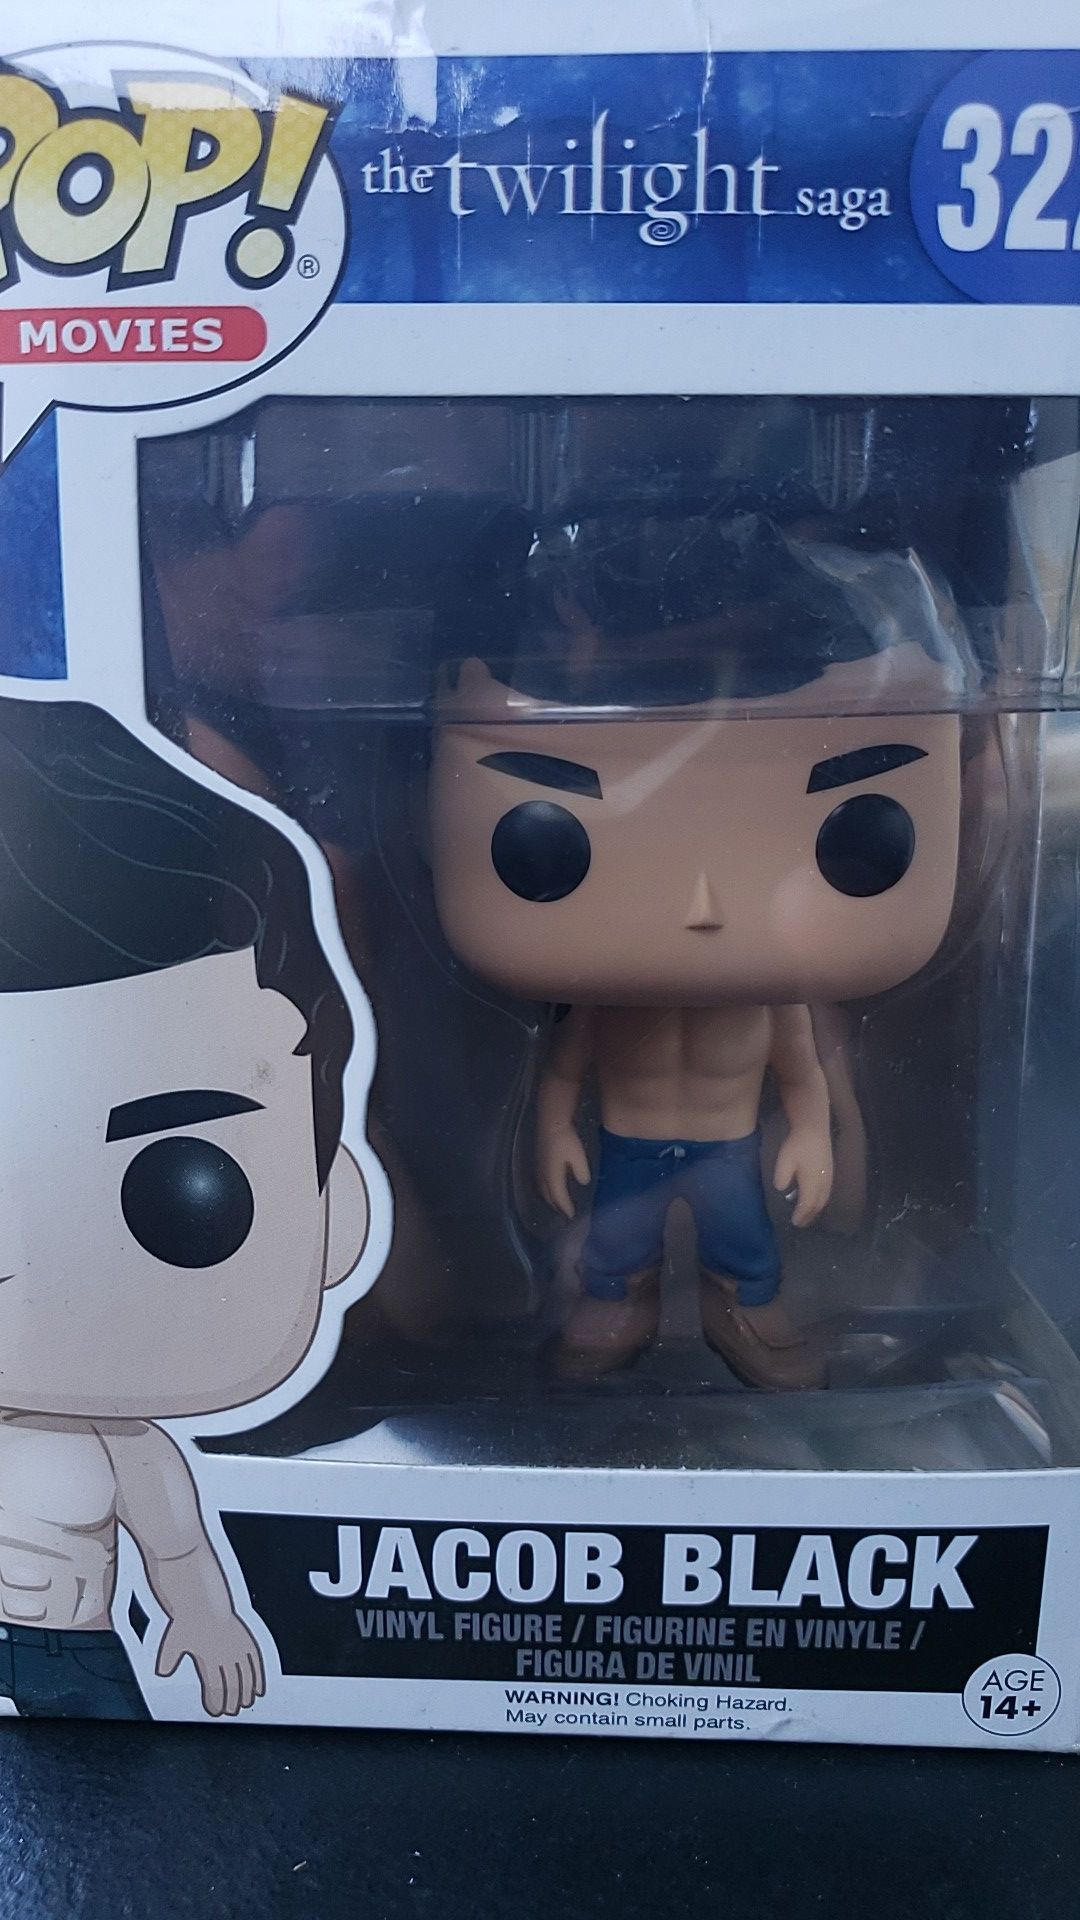 FUNKO POP COLLECTIBLE ACTION FIGURE JACOB BLACK 322 THE TWILIGHT SAGA DAMAGED PACKAGING PICK UP IN WHITTIER THANKS 😊